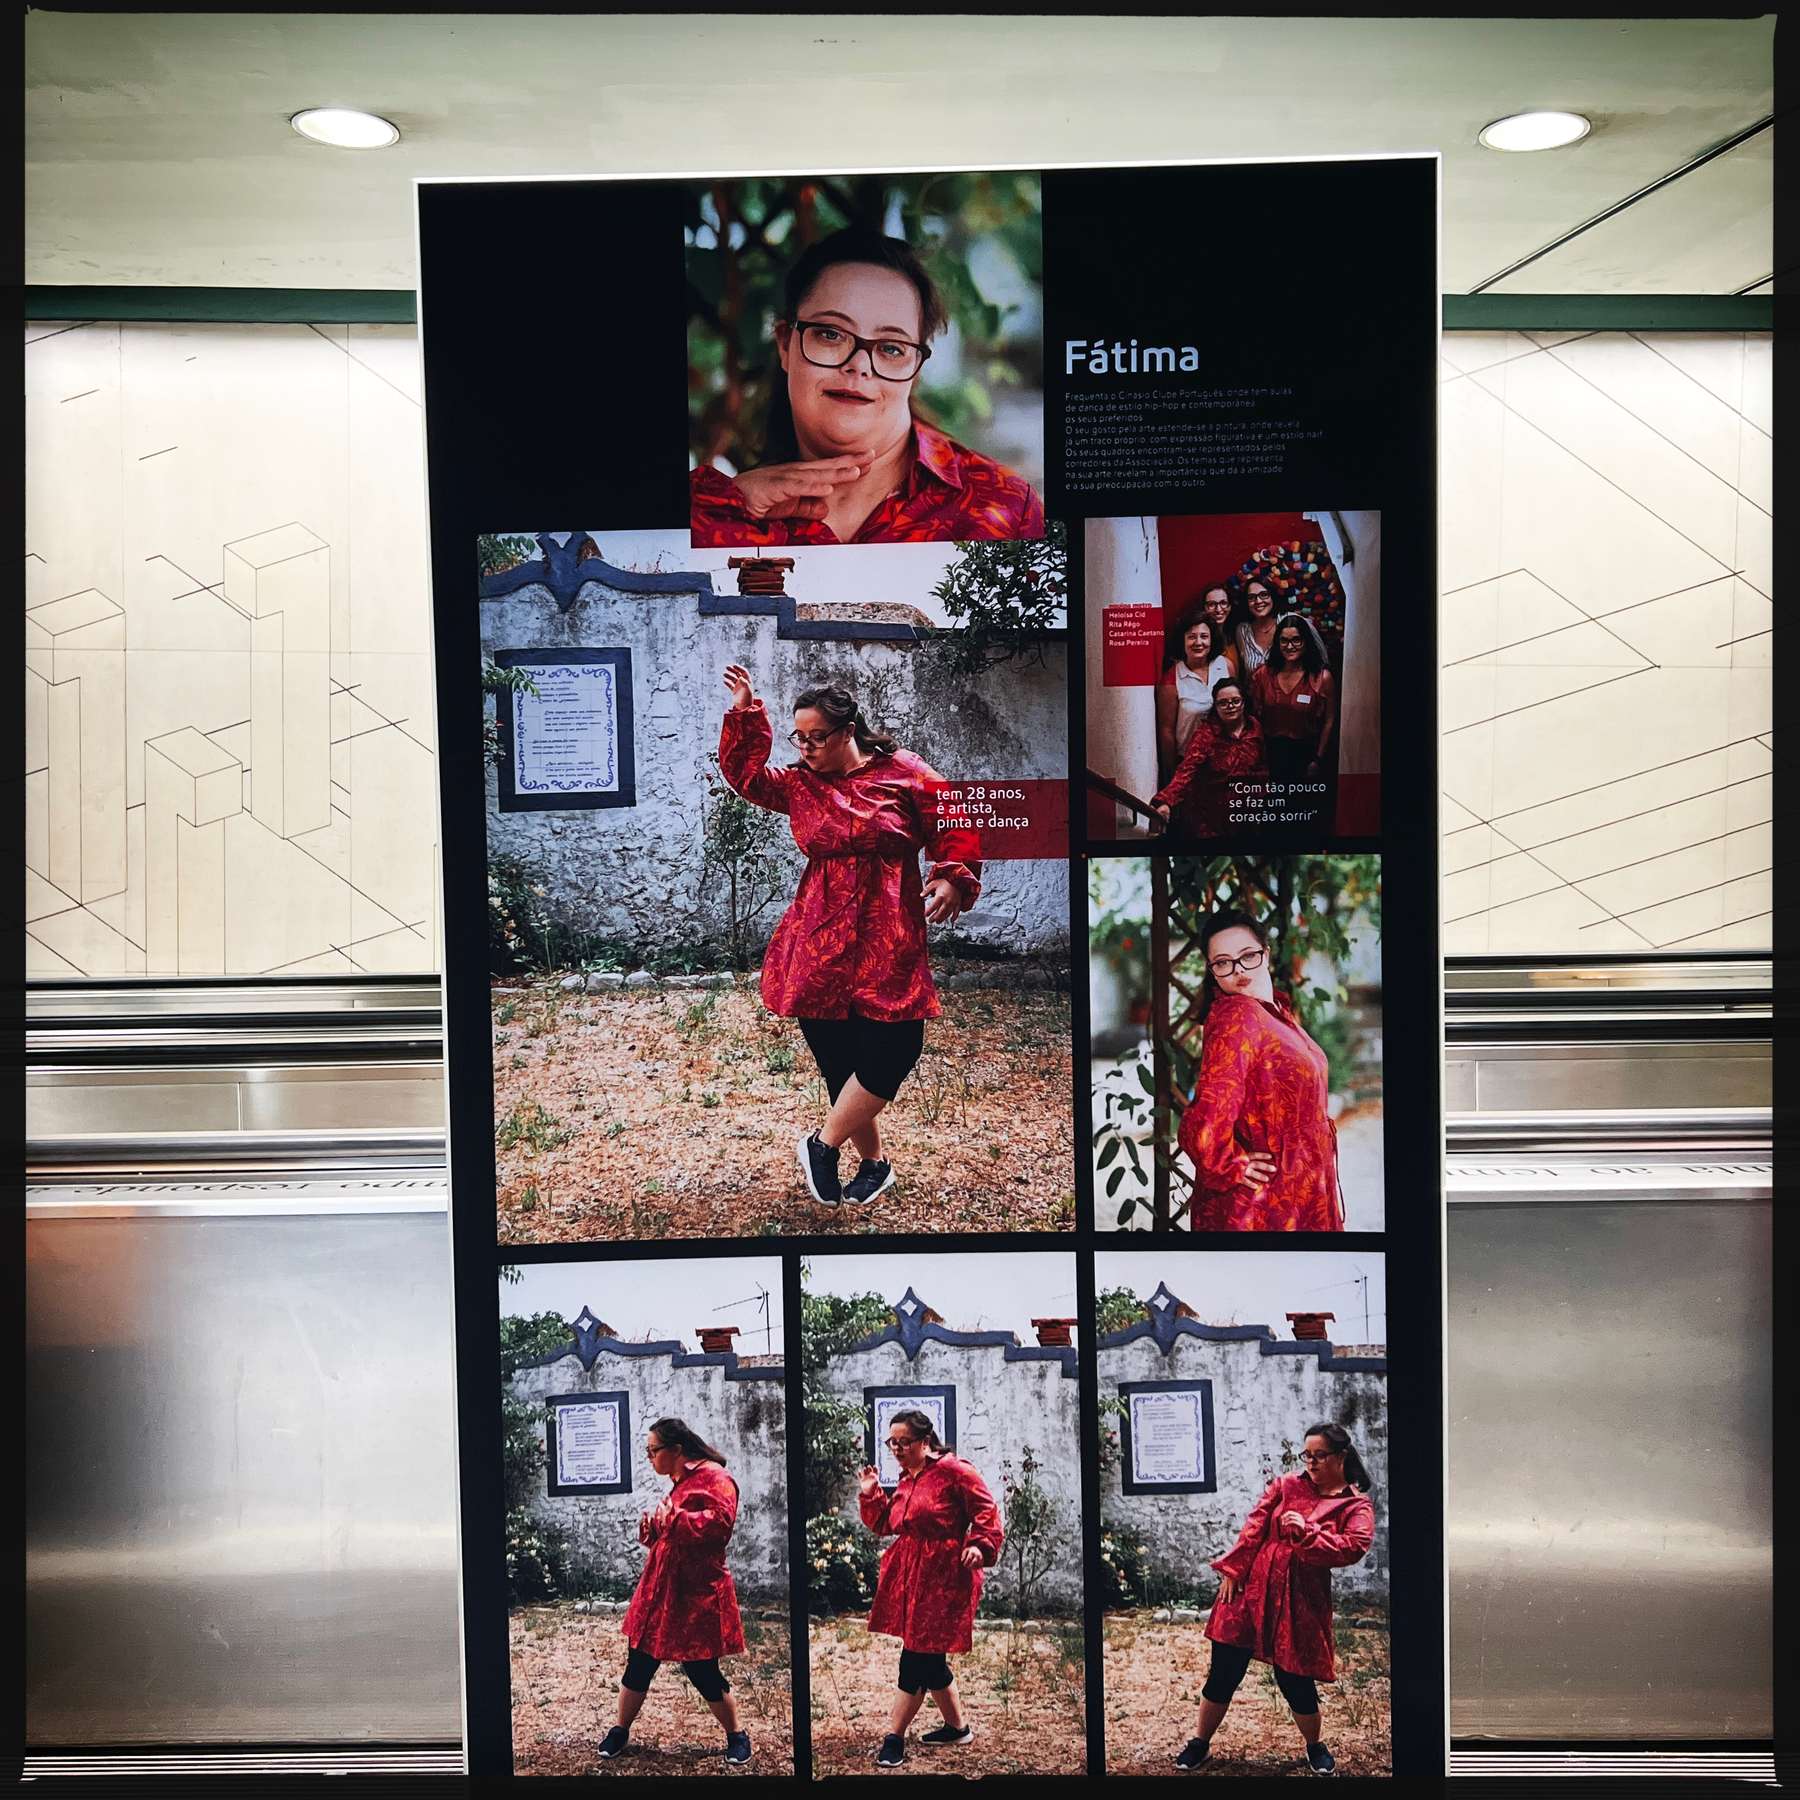 a few photos are shown inside a metro station. A girl is dancing.